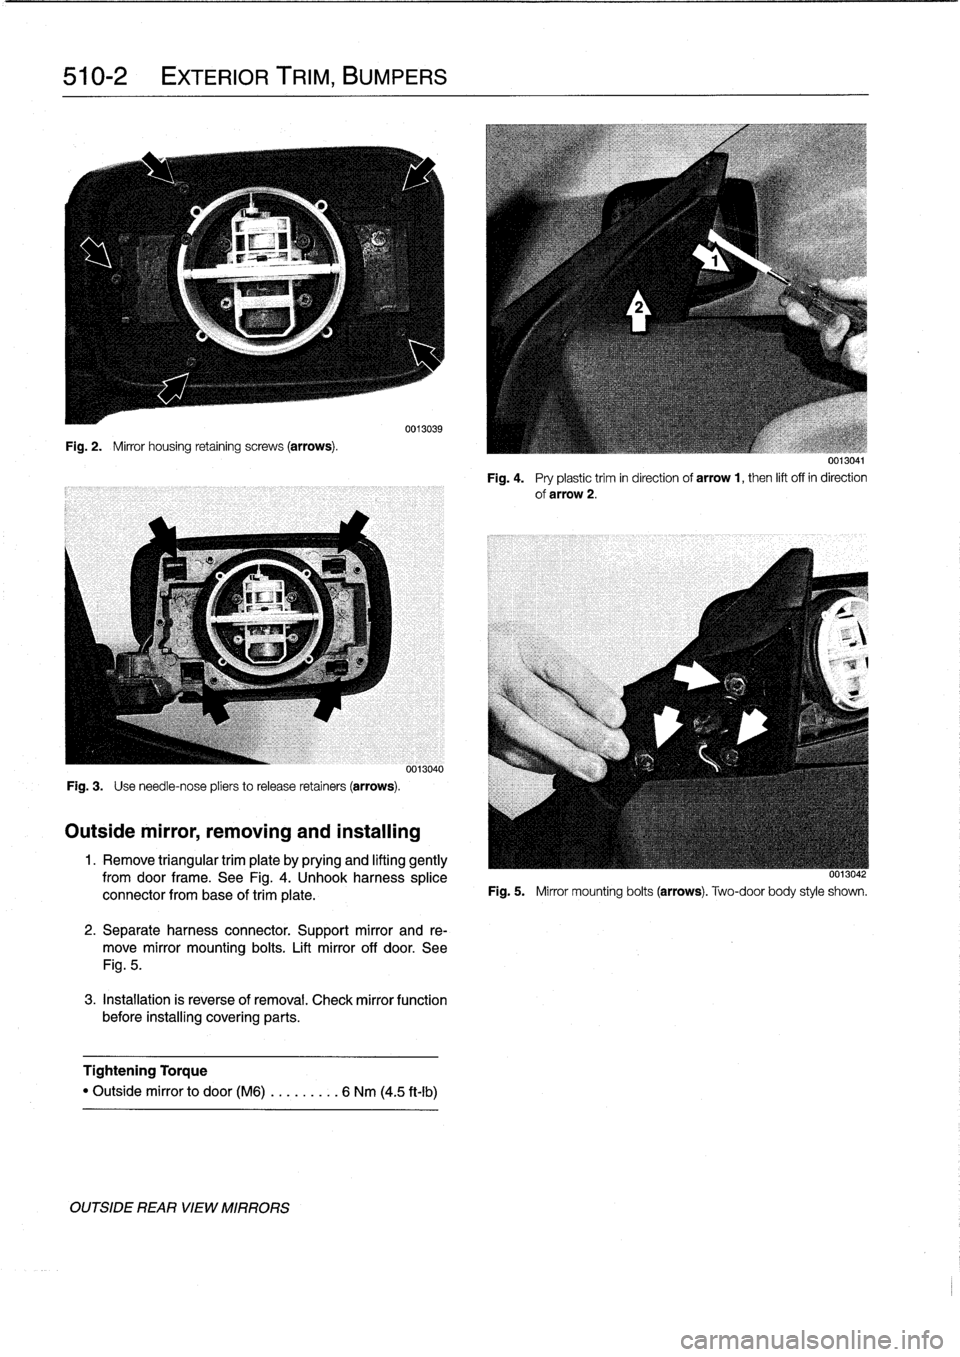 BMW 328i 1993 E36 Workshop Manual 
510-2

	

EXTERIOR
TRIIVI,
BUMPERS

Fig
.
2
.

	

Mirror
housing
retaining
screws
(arrows)
.

Fig
.
3
.

	

Use
need1e-nose
pliers
to
release
retainers
(arrows)
.

Outside
mirror,
removing
and
instal